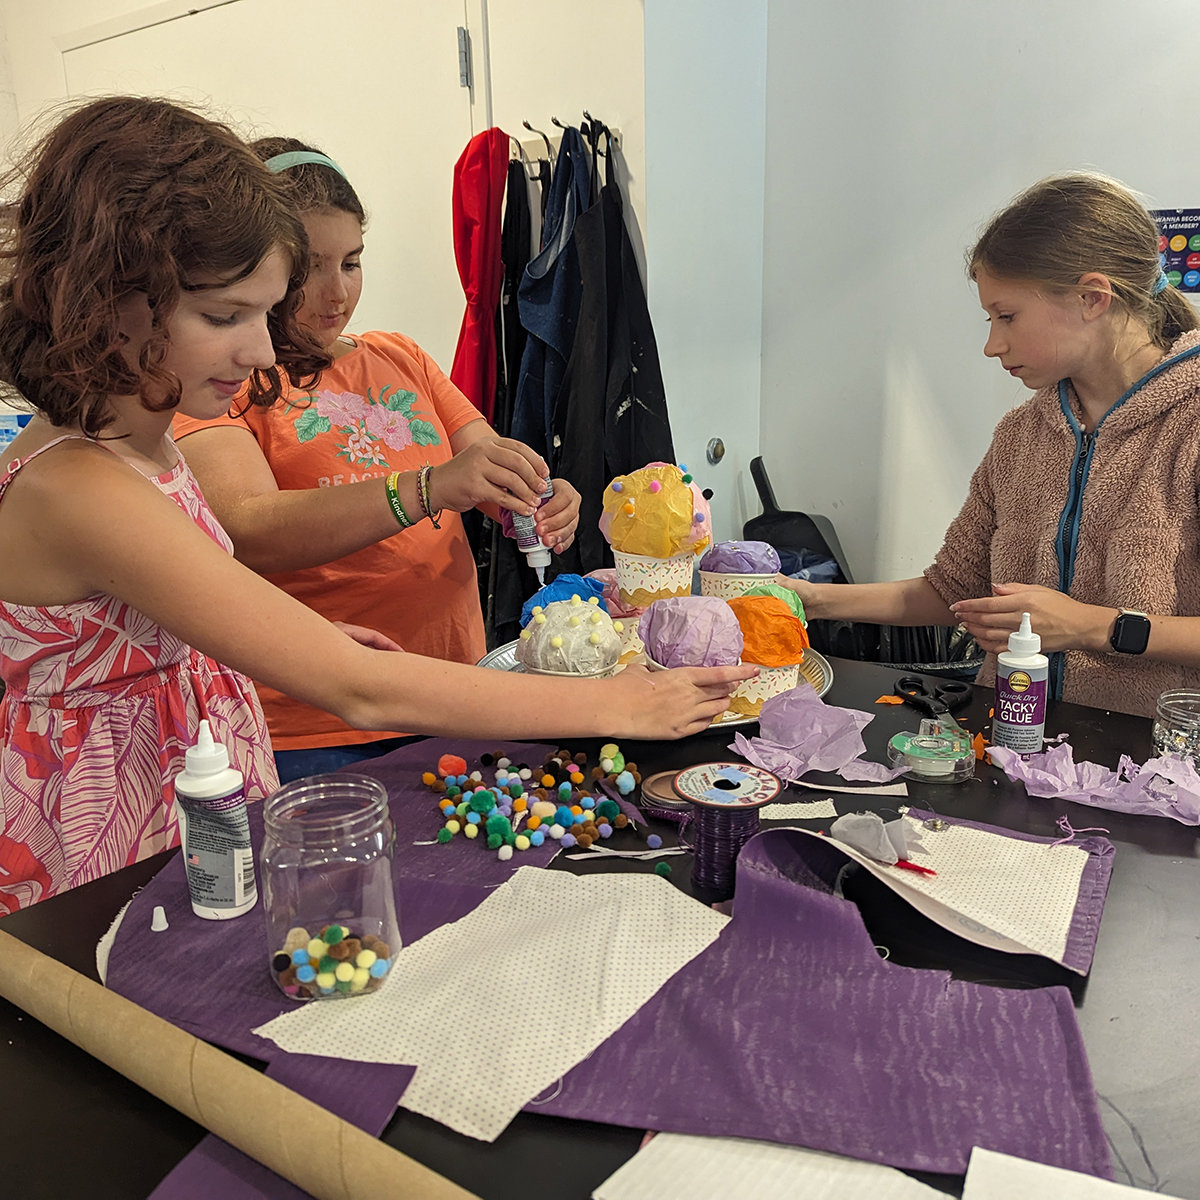 Youth education students creating a soft sculpture of cupcakes using colorful fiber materials, glue, and pom poms